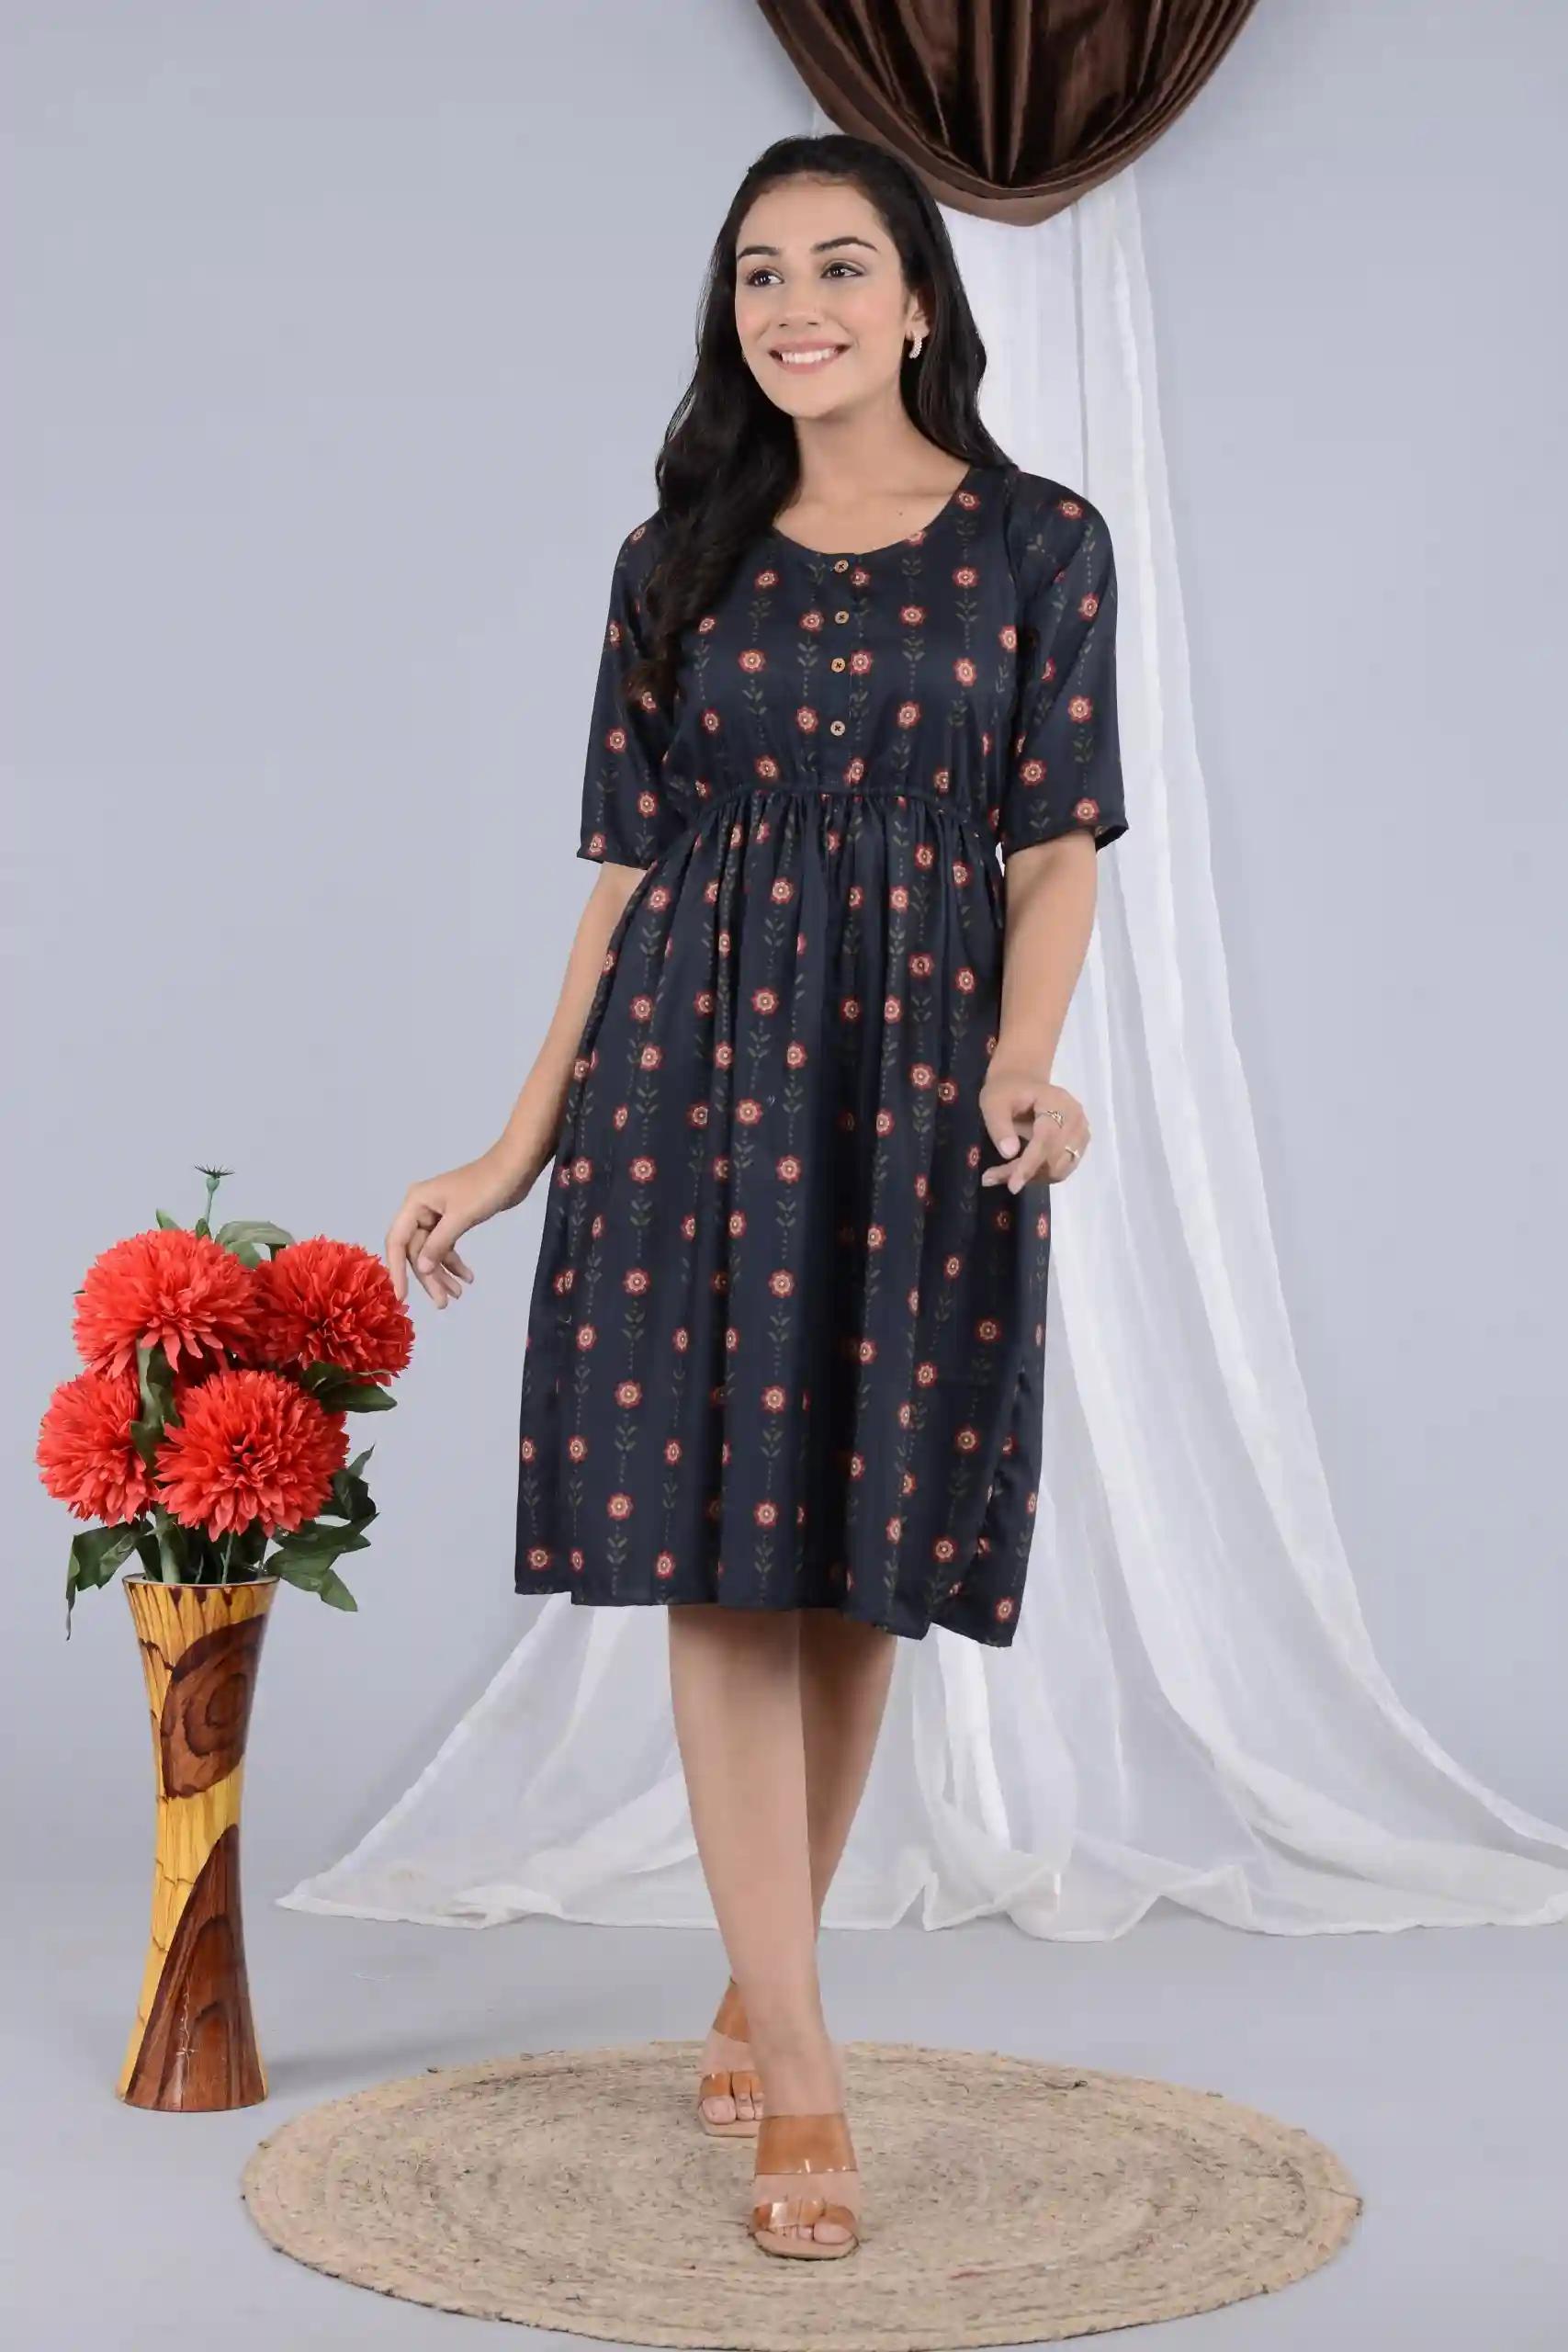 Floral Print Round Neck Dress for Women